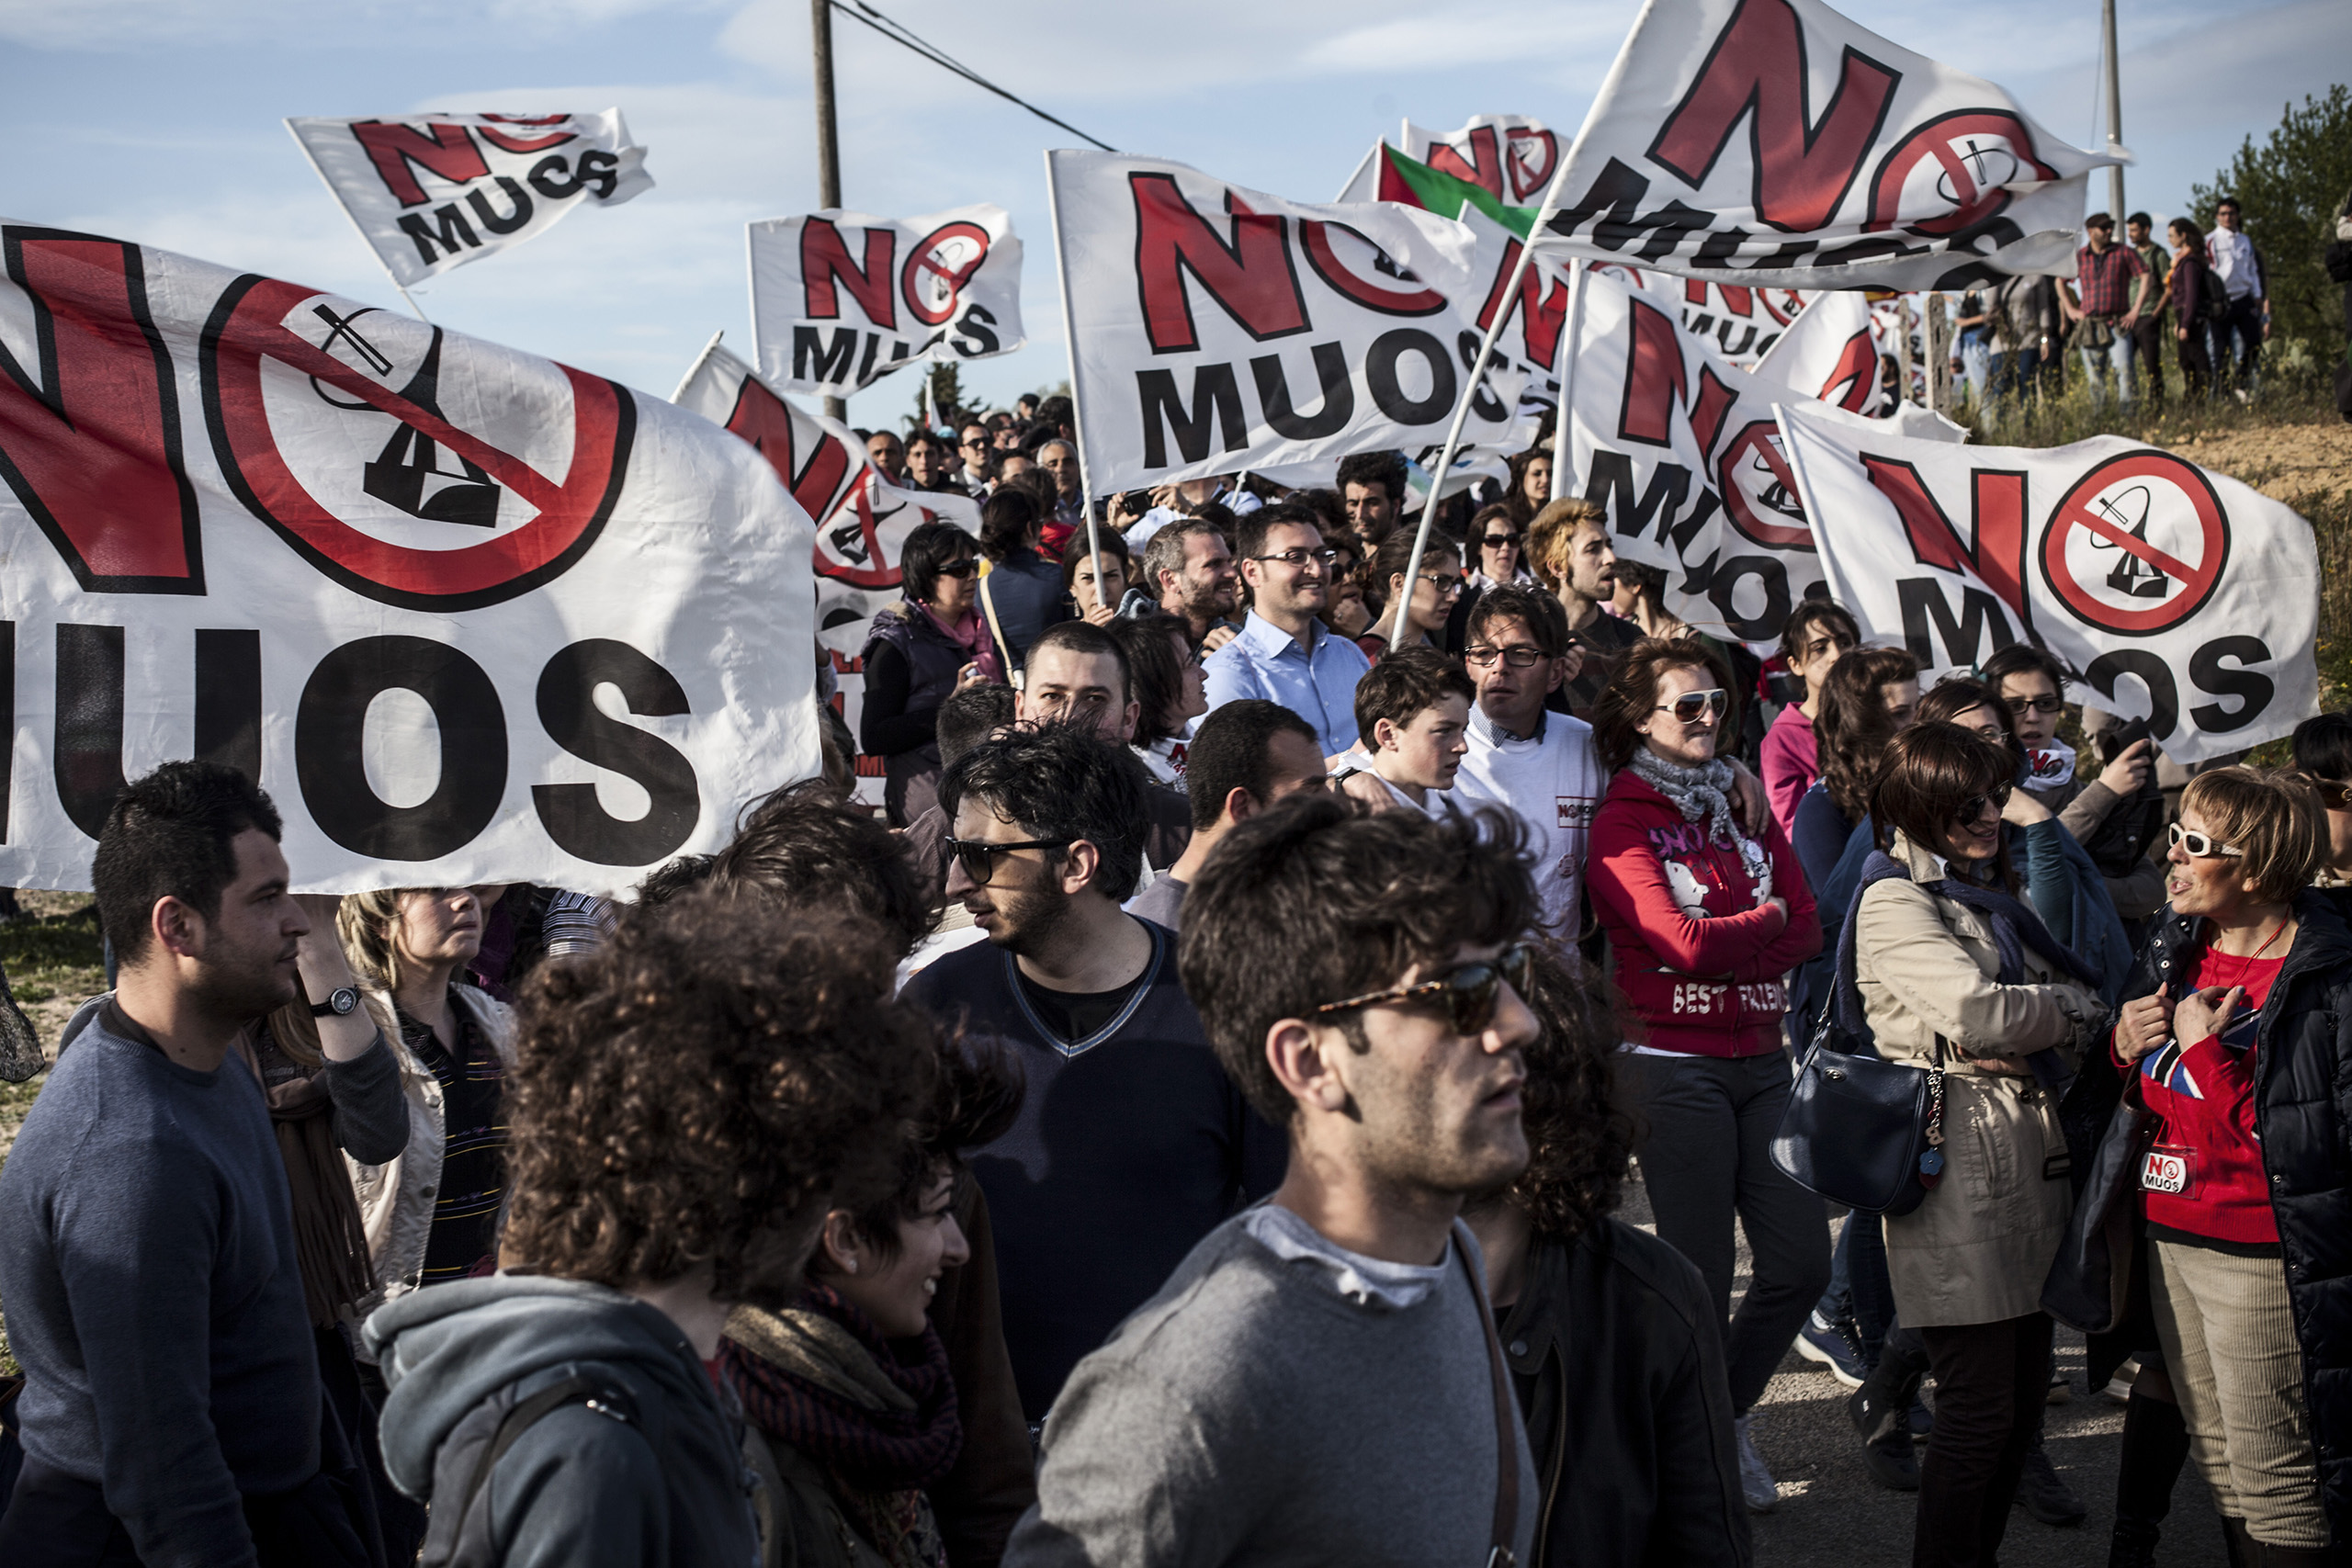 A "No MUOS" demonstration outside the American military base NRTF-8 in Nisceni, Italy, March 30, 2013. (Alessio Mamo—Redux)